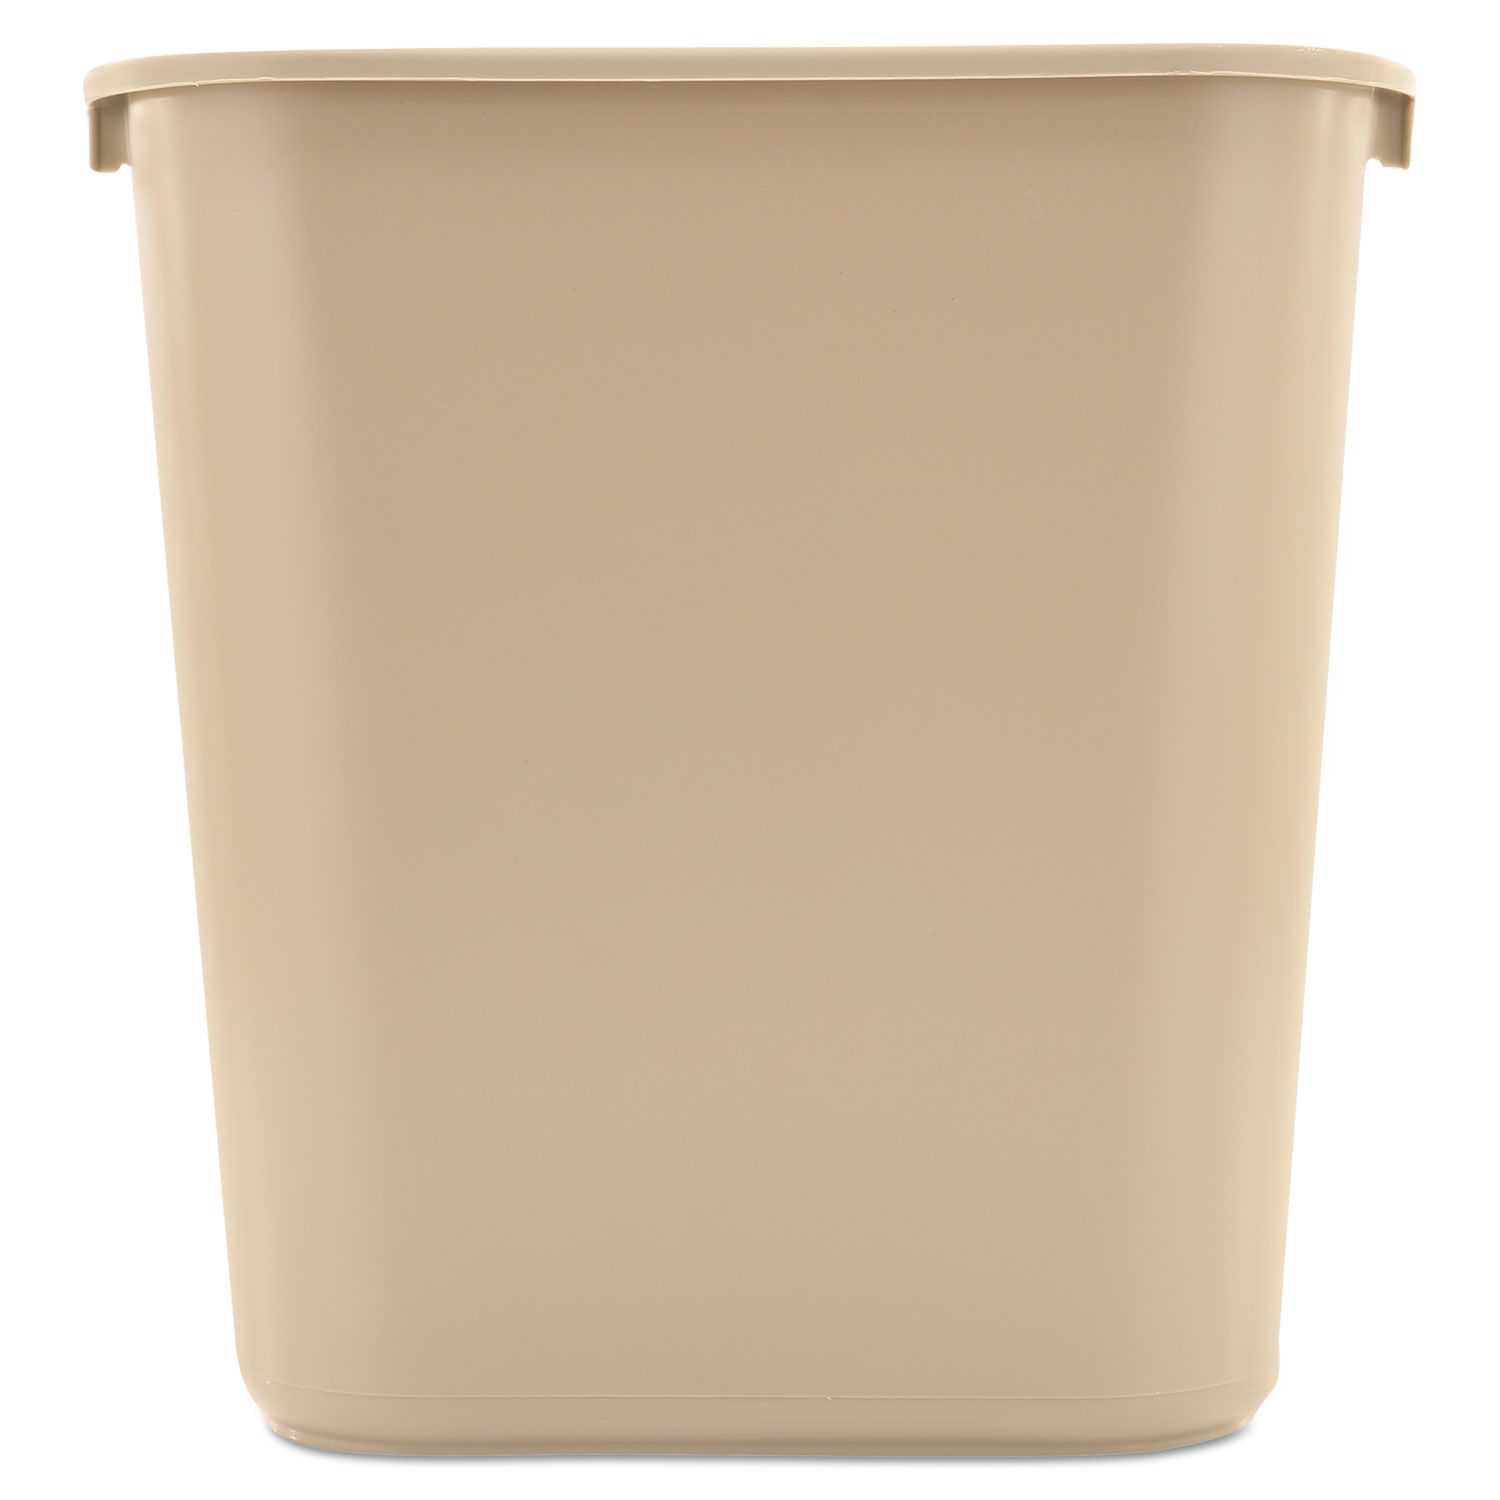 Rubbermaid Commercial Products Trash Can ,50 gal.,Beige,Plastic